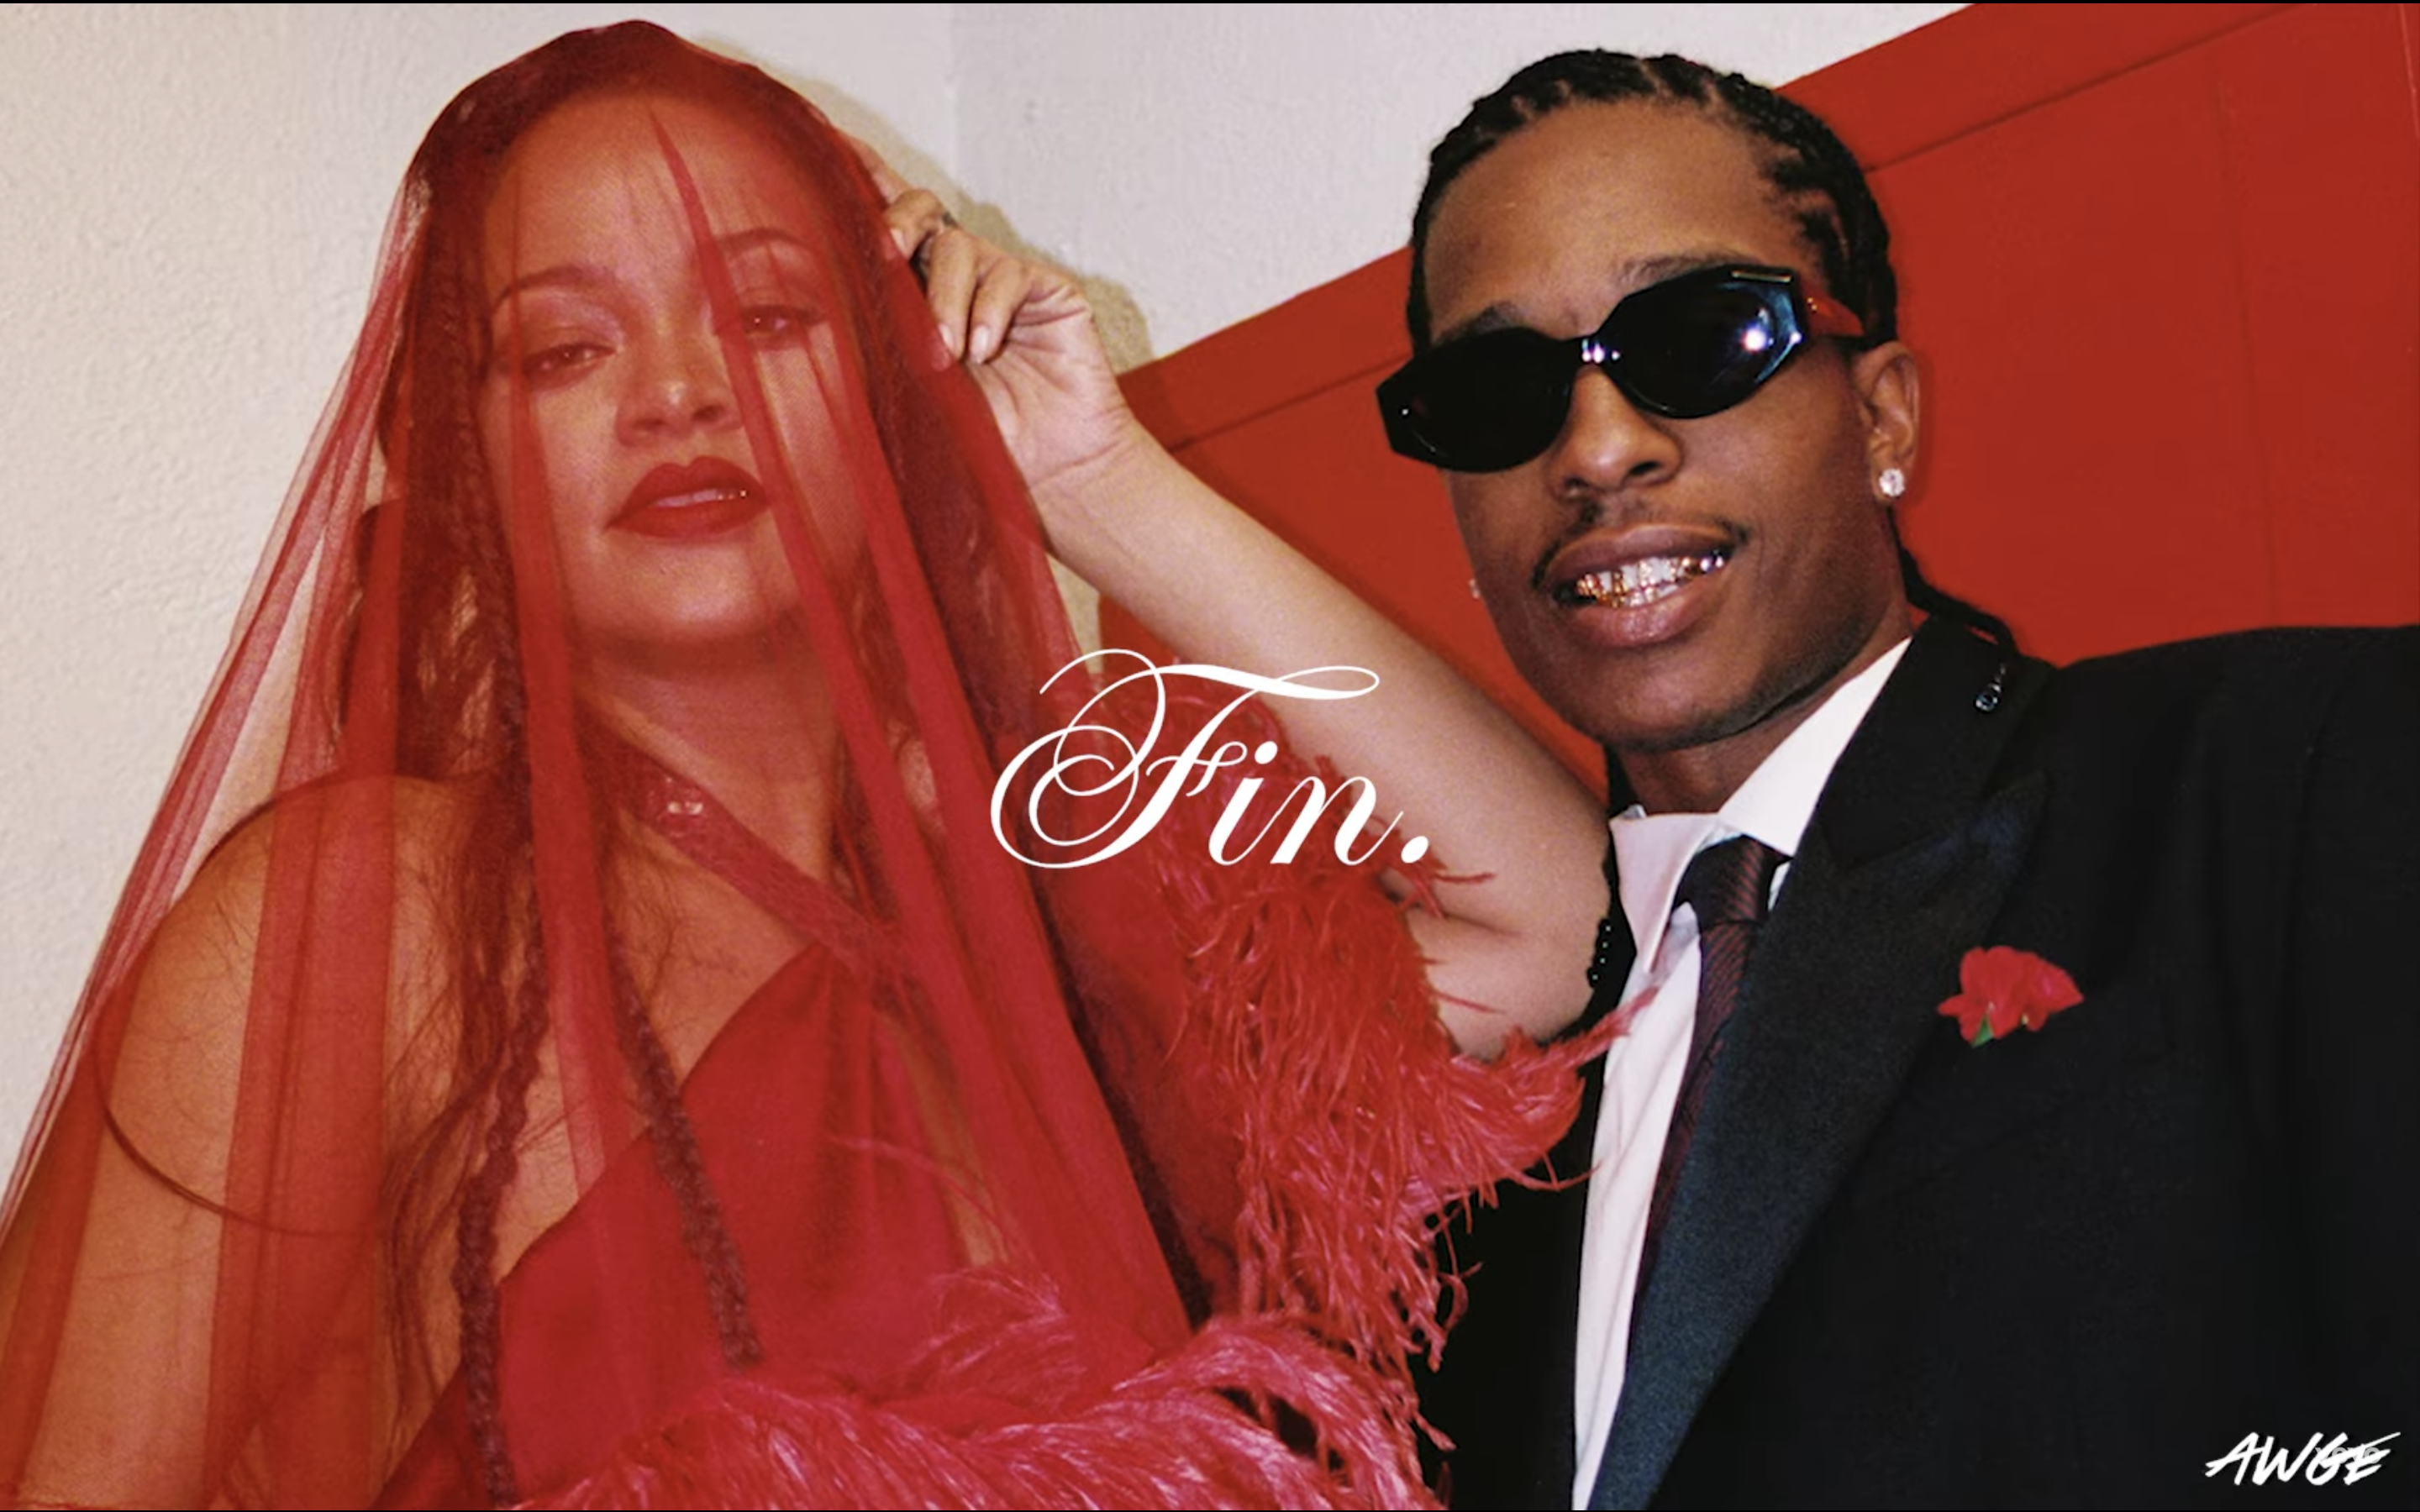 Rihanna, A$AP Rocky 'marry' in music video: See photos of the couple